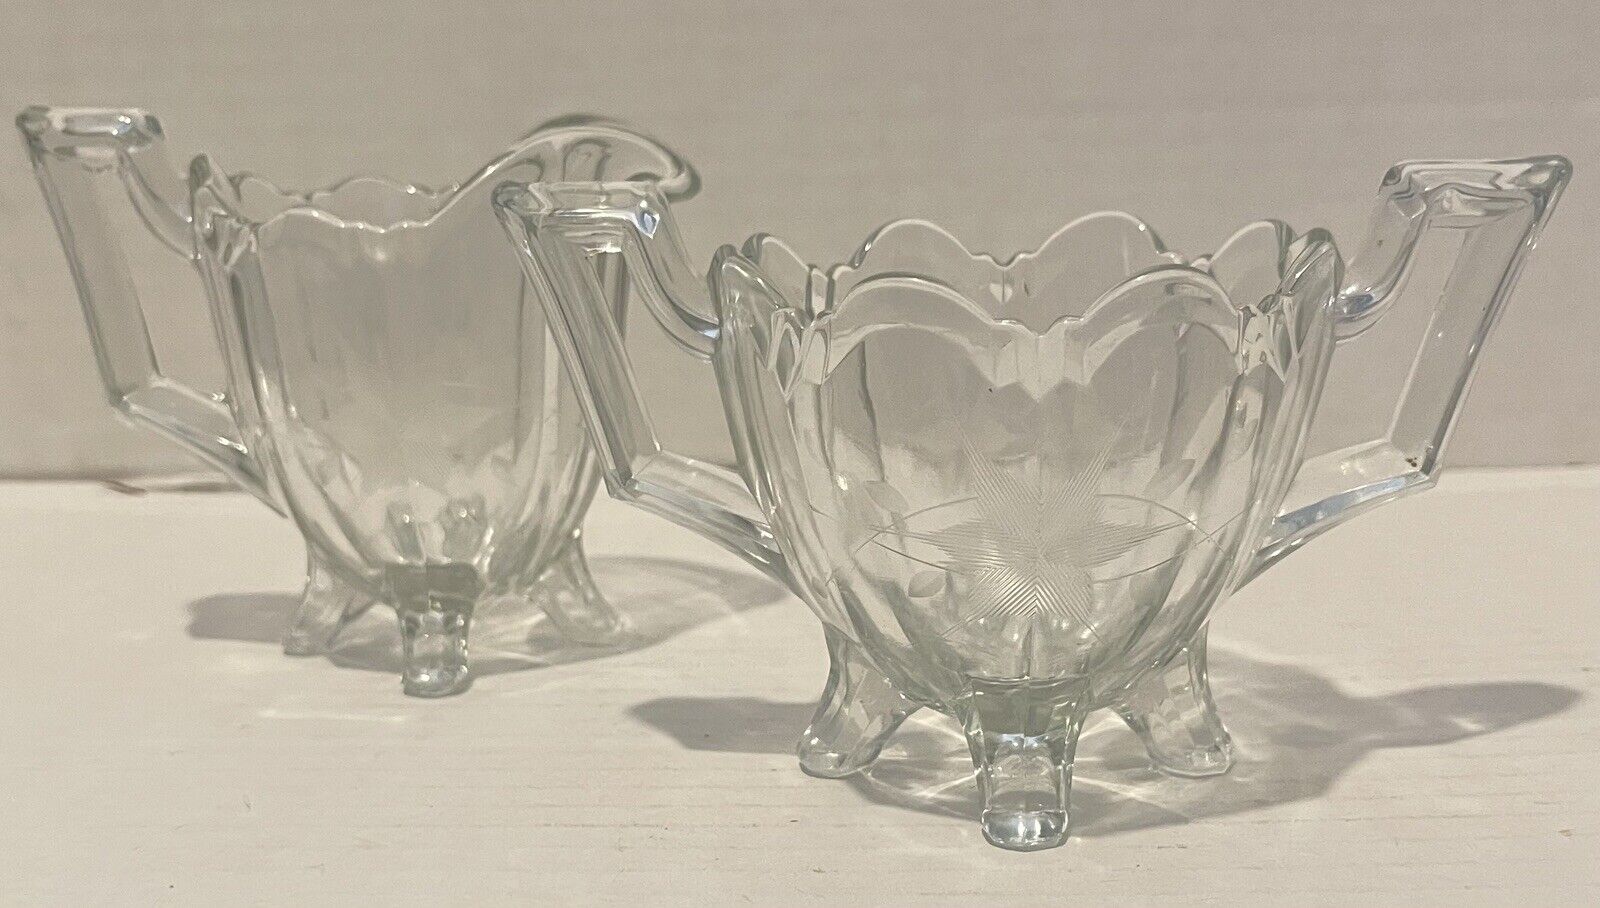 Vintage Clear Cut Glass Footed Sugar Bowl & Creamer Set With Floral Design